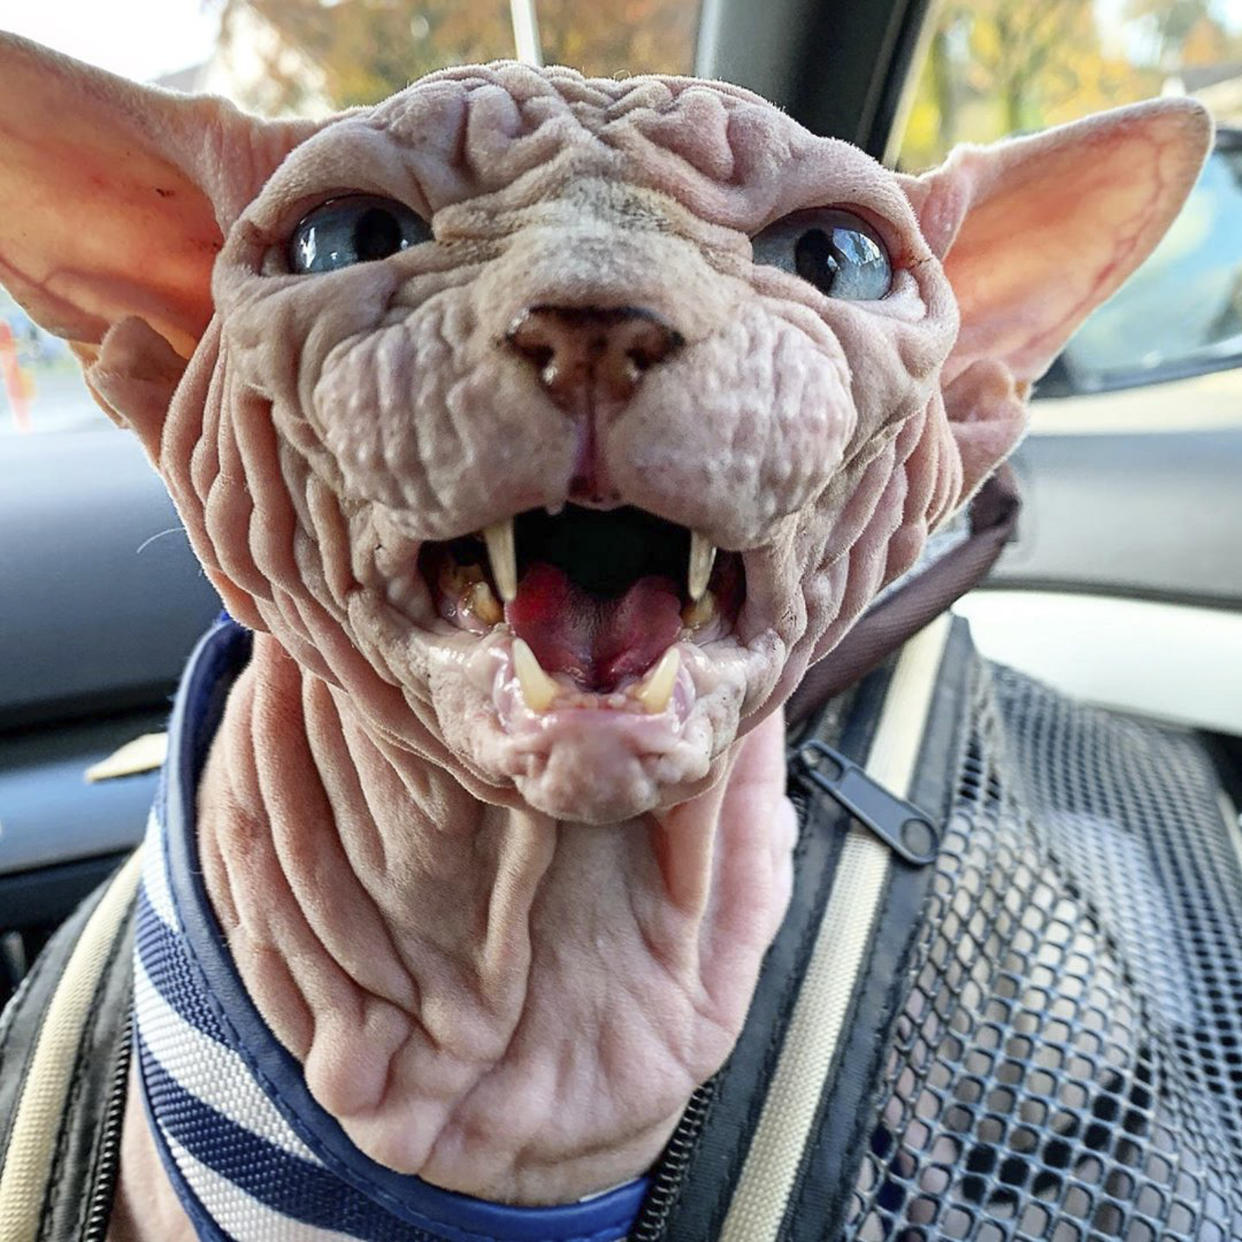 A sphynx cat covered in wrinkles has stolen the hearts of many on the internet thanks to his unique appearance. (Photo: Caters News Agency)